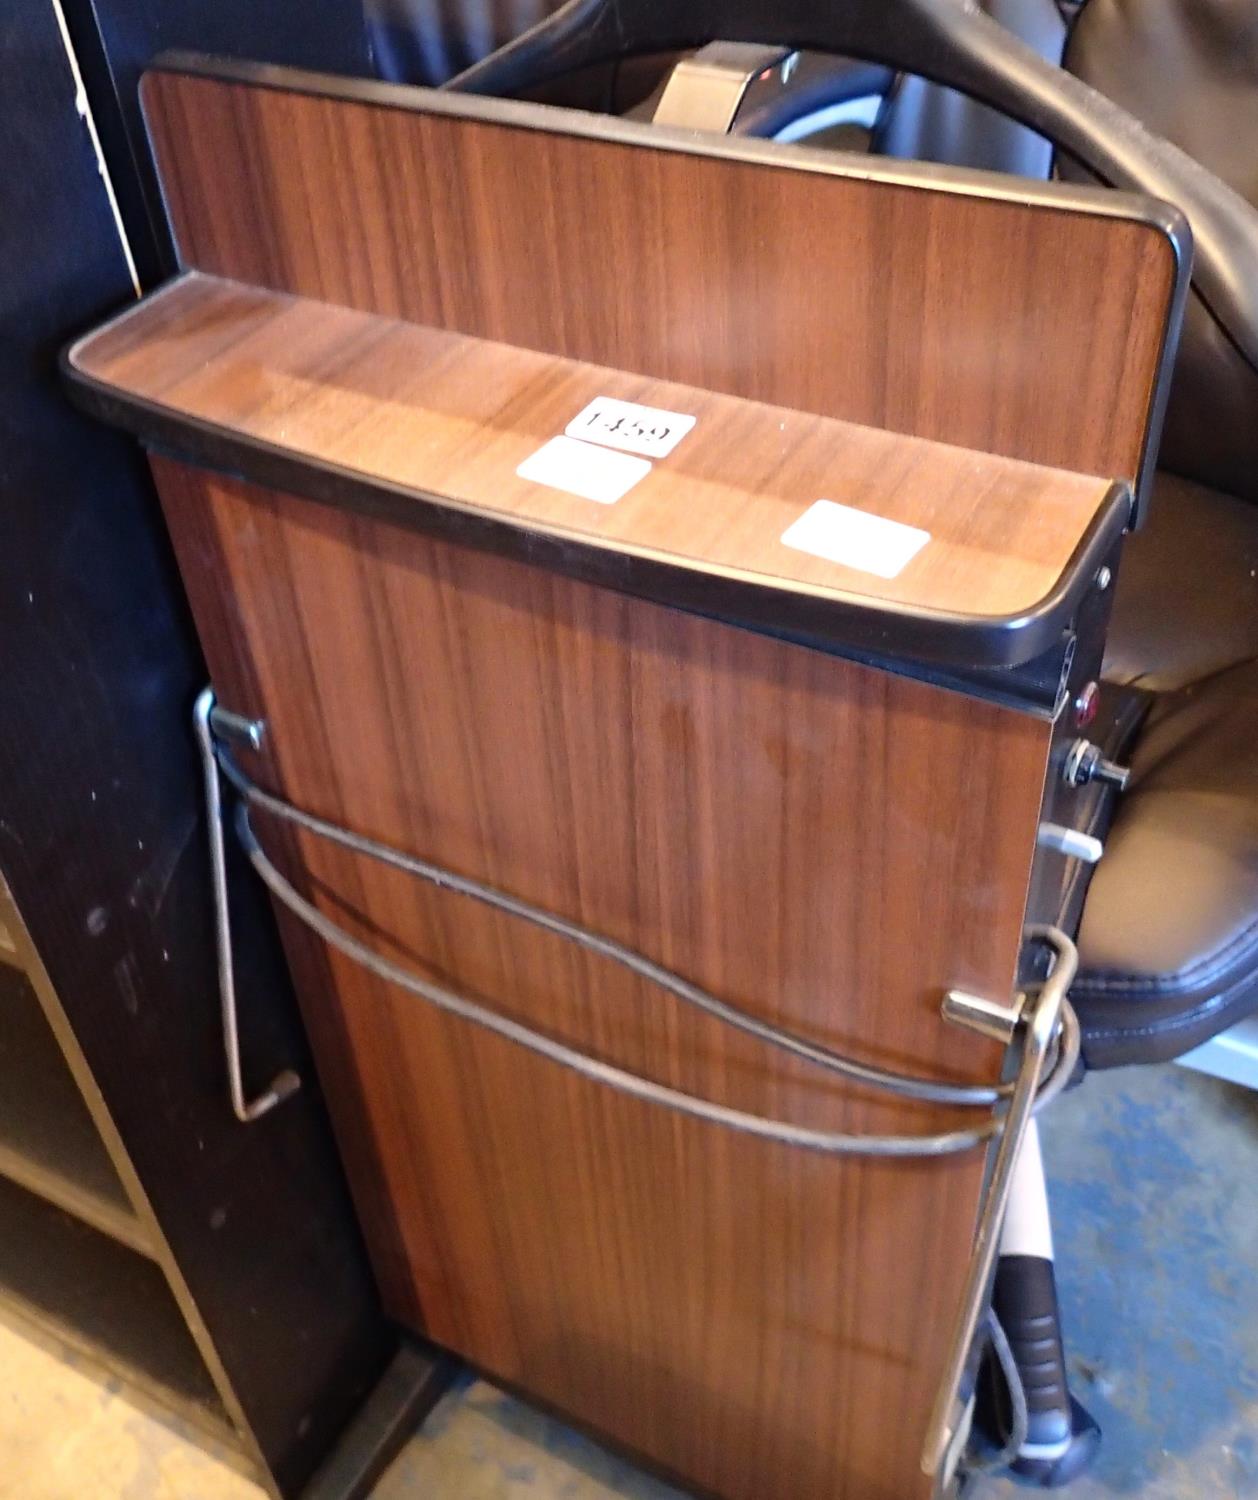 Retro Corby trouser press. Not available for in-house P&P, contact Paul O'Hea at Mailboxes on